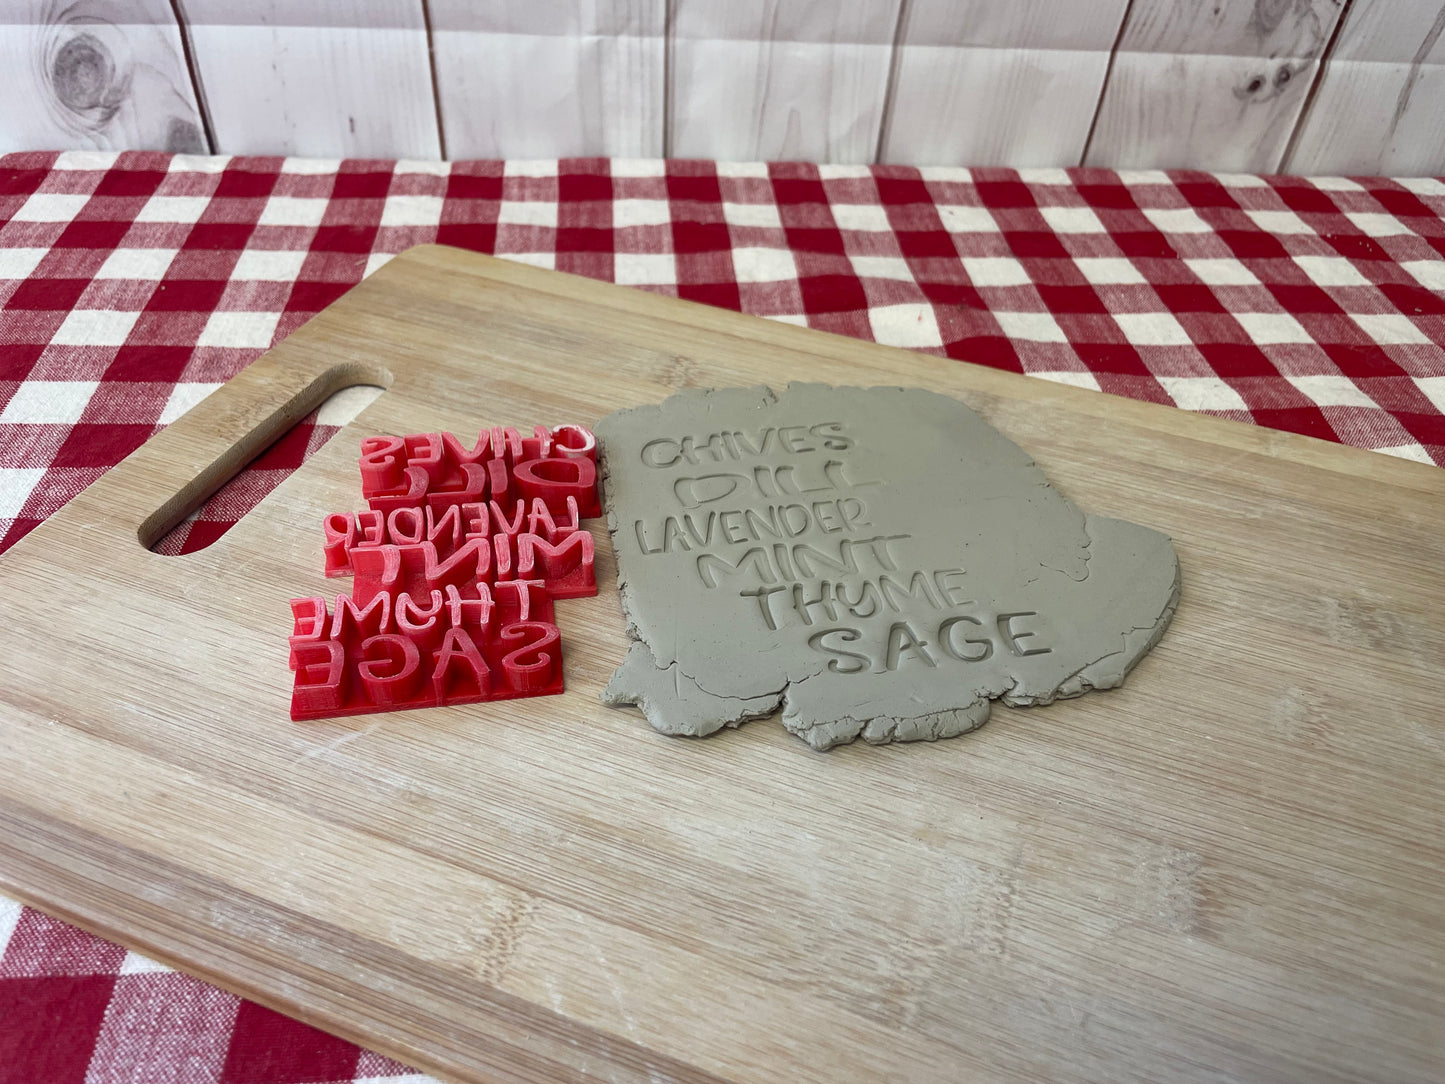 Herb Garden Stake Words Pottery Stamps - Basil, Dill, Parsley, etc, 3D Printed, each